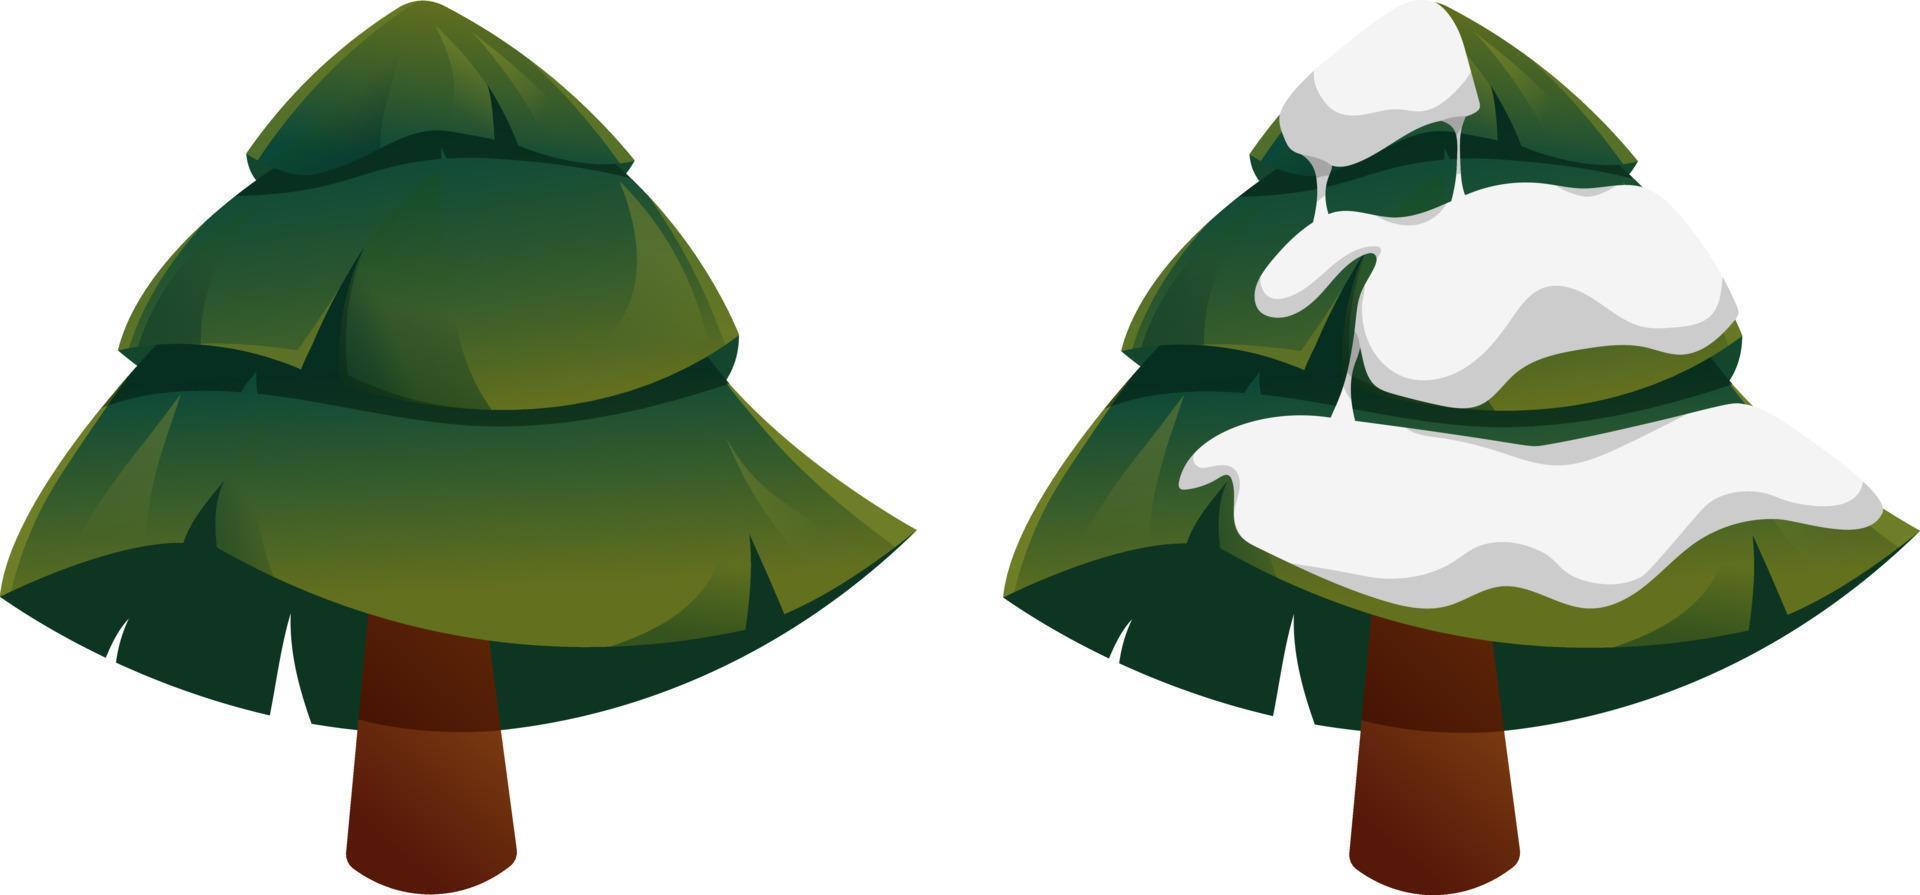 Big Christmas tree in cartoon style with and without snow isolated vector